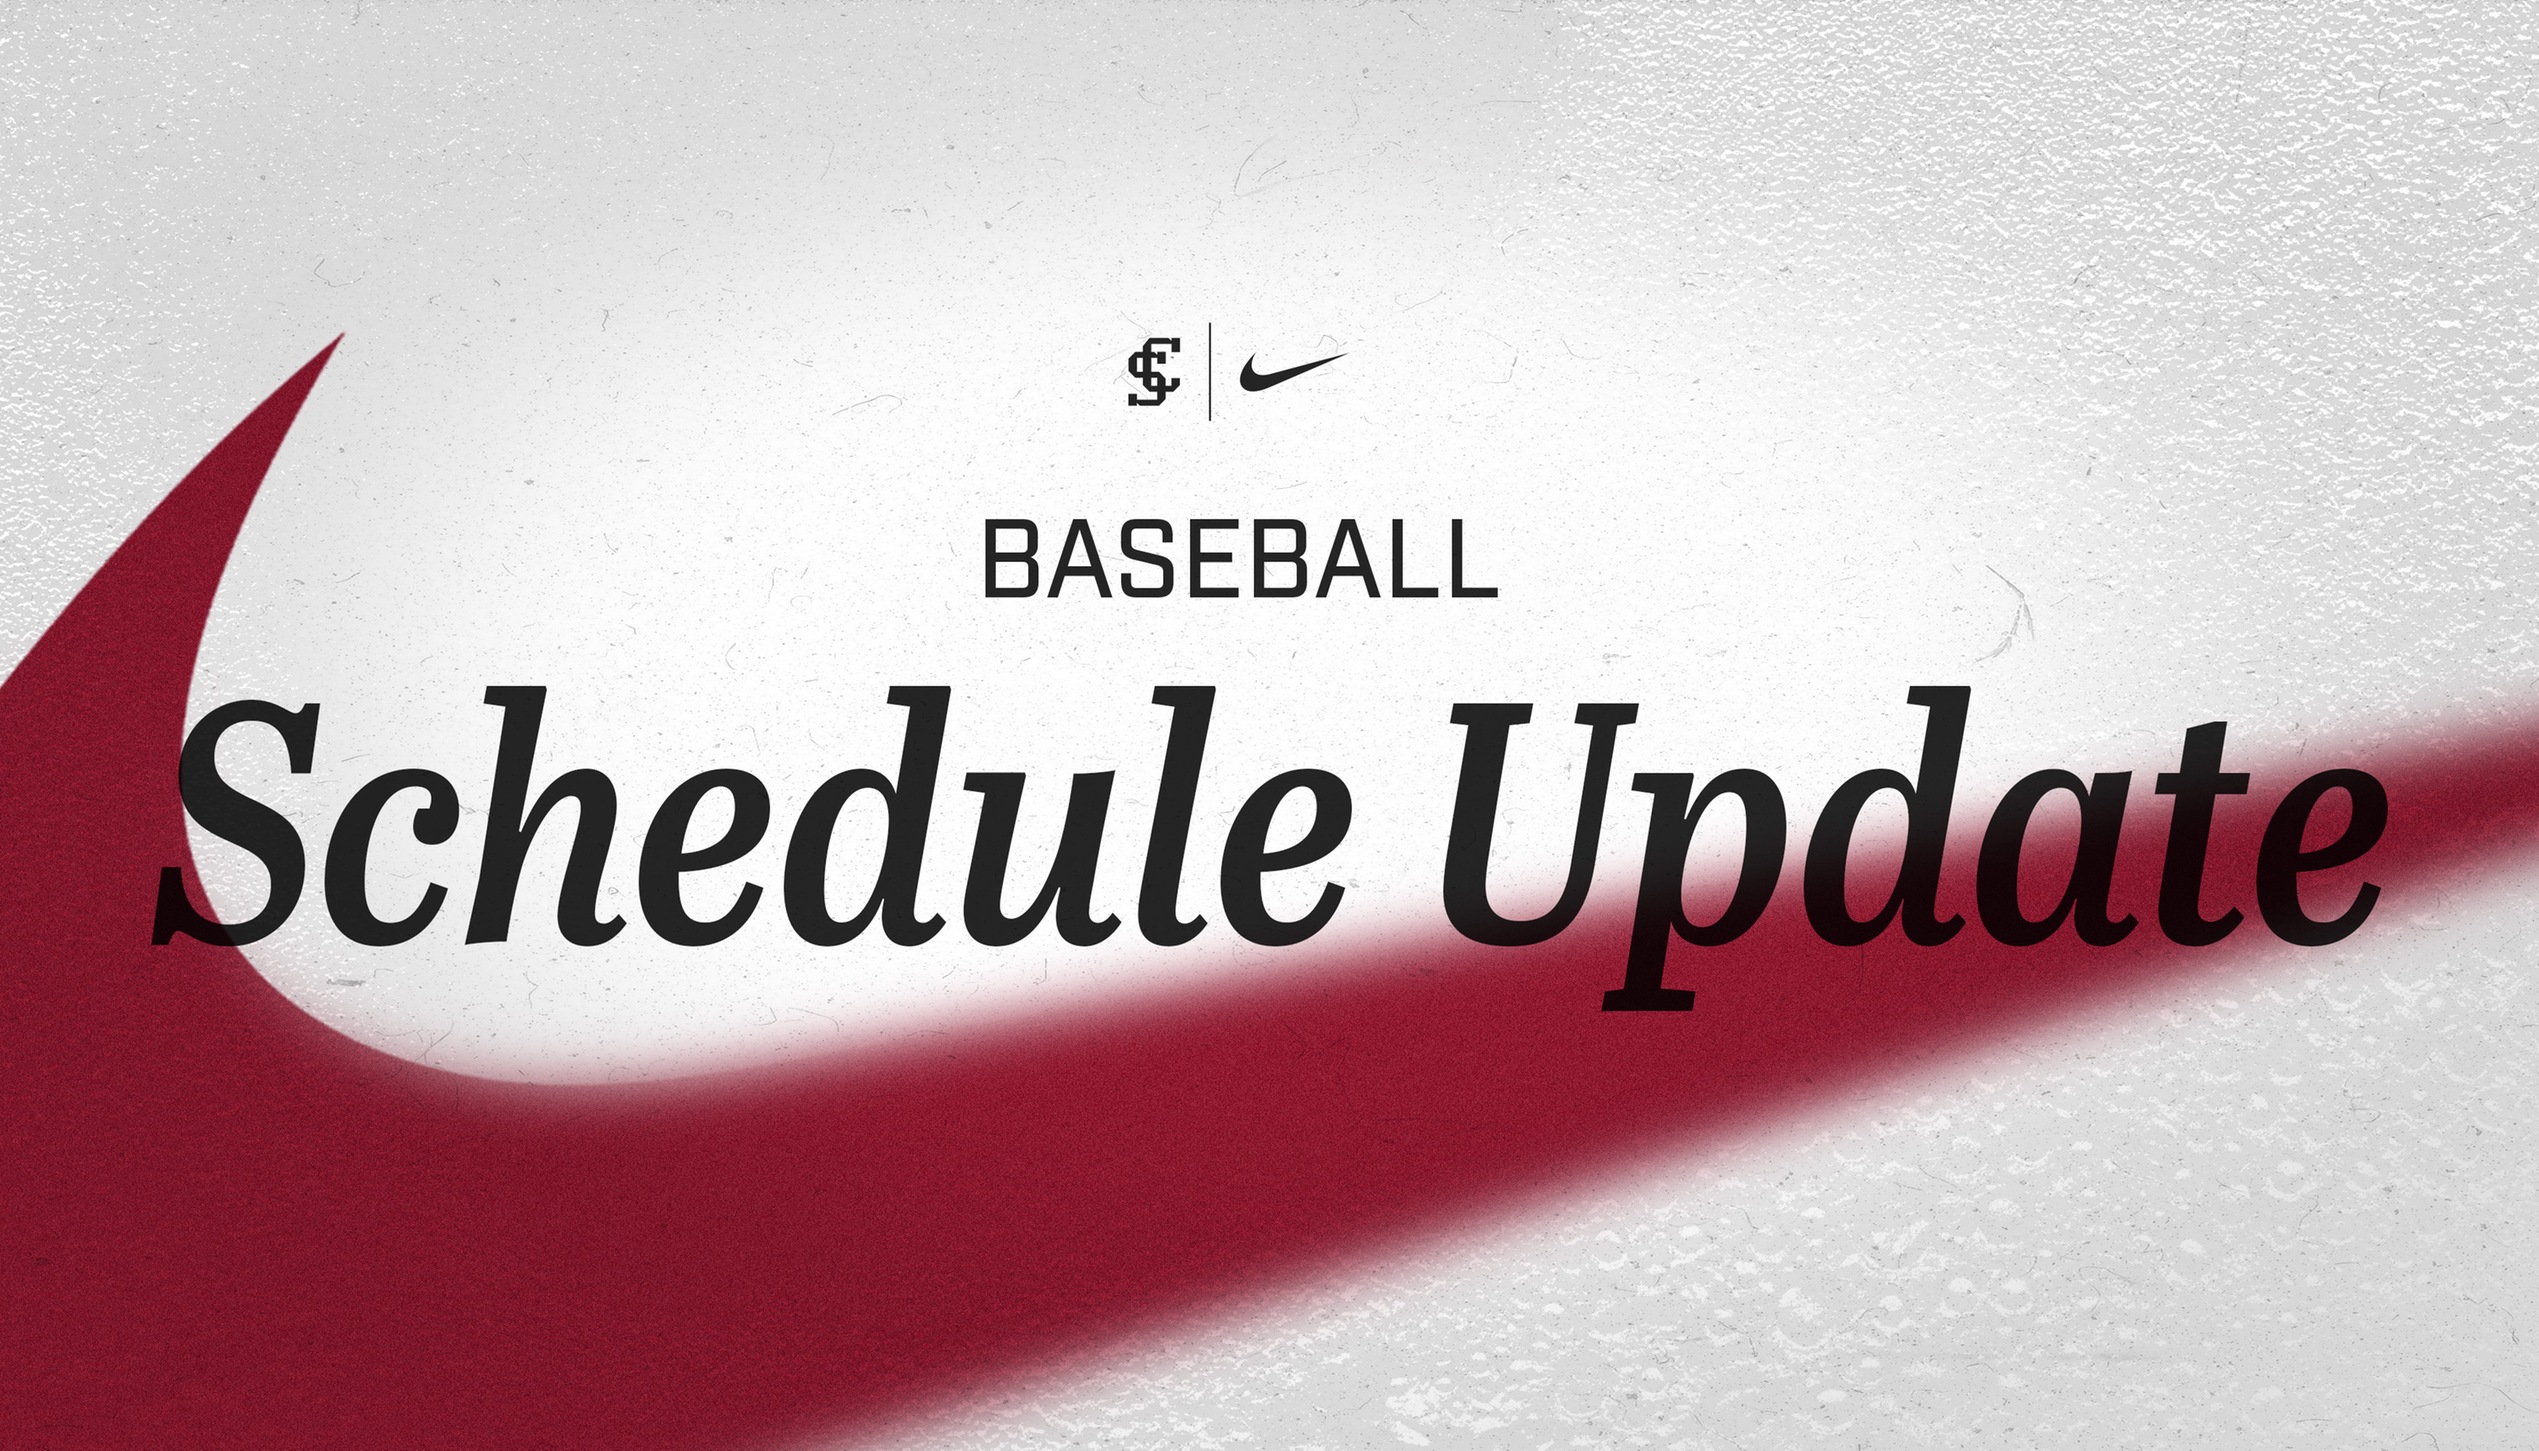 Baseball's Tuesday Game With Nevada Canceled